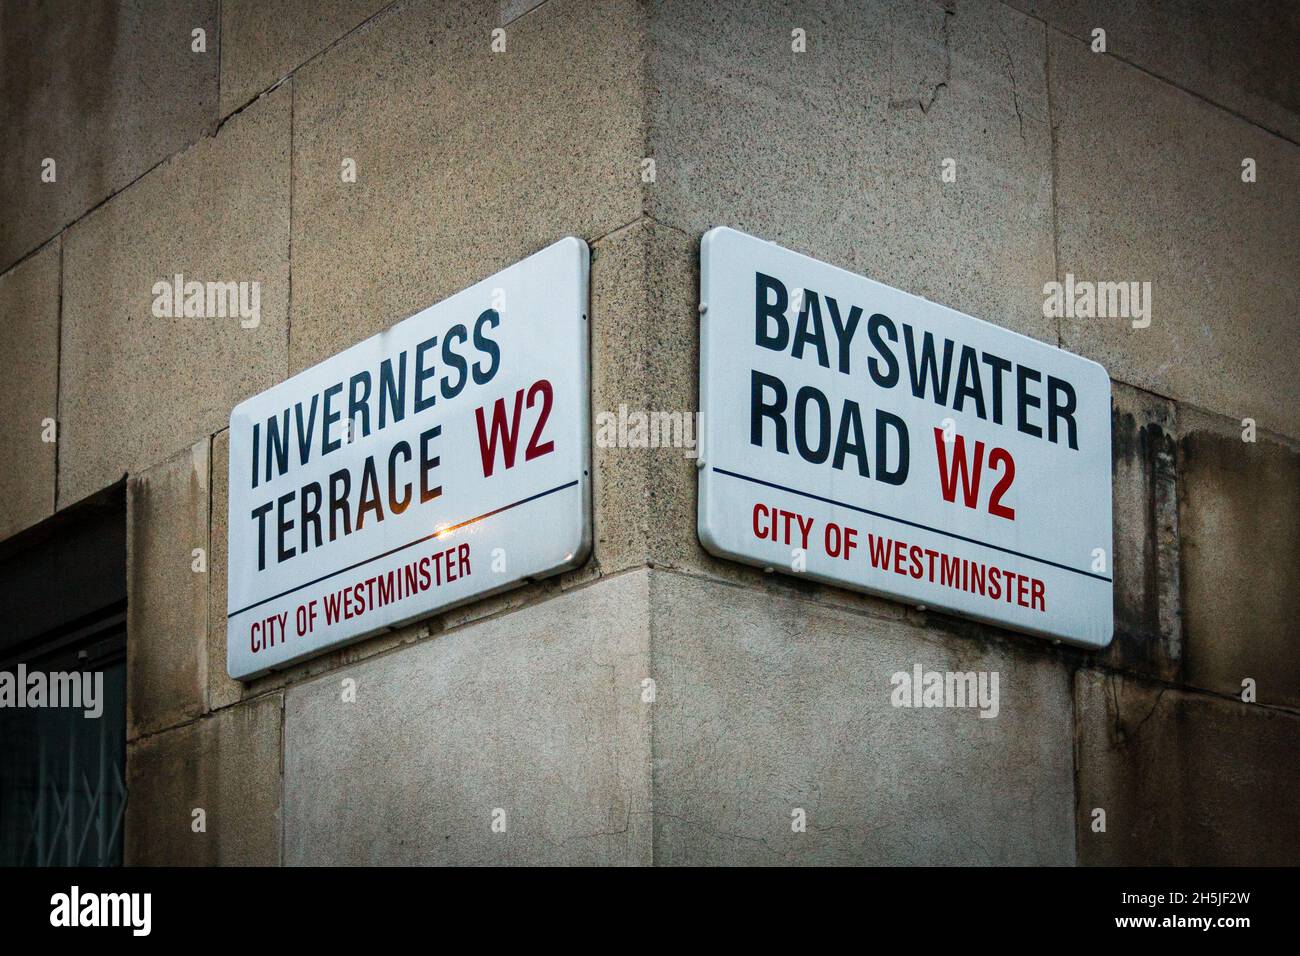 London, United Kingdom; March 15th 2011: Street signs at the corner of Inverness Terrace and Bayswater Road. Stock Photo